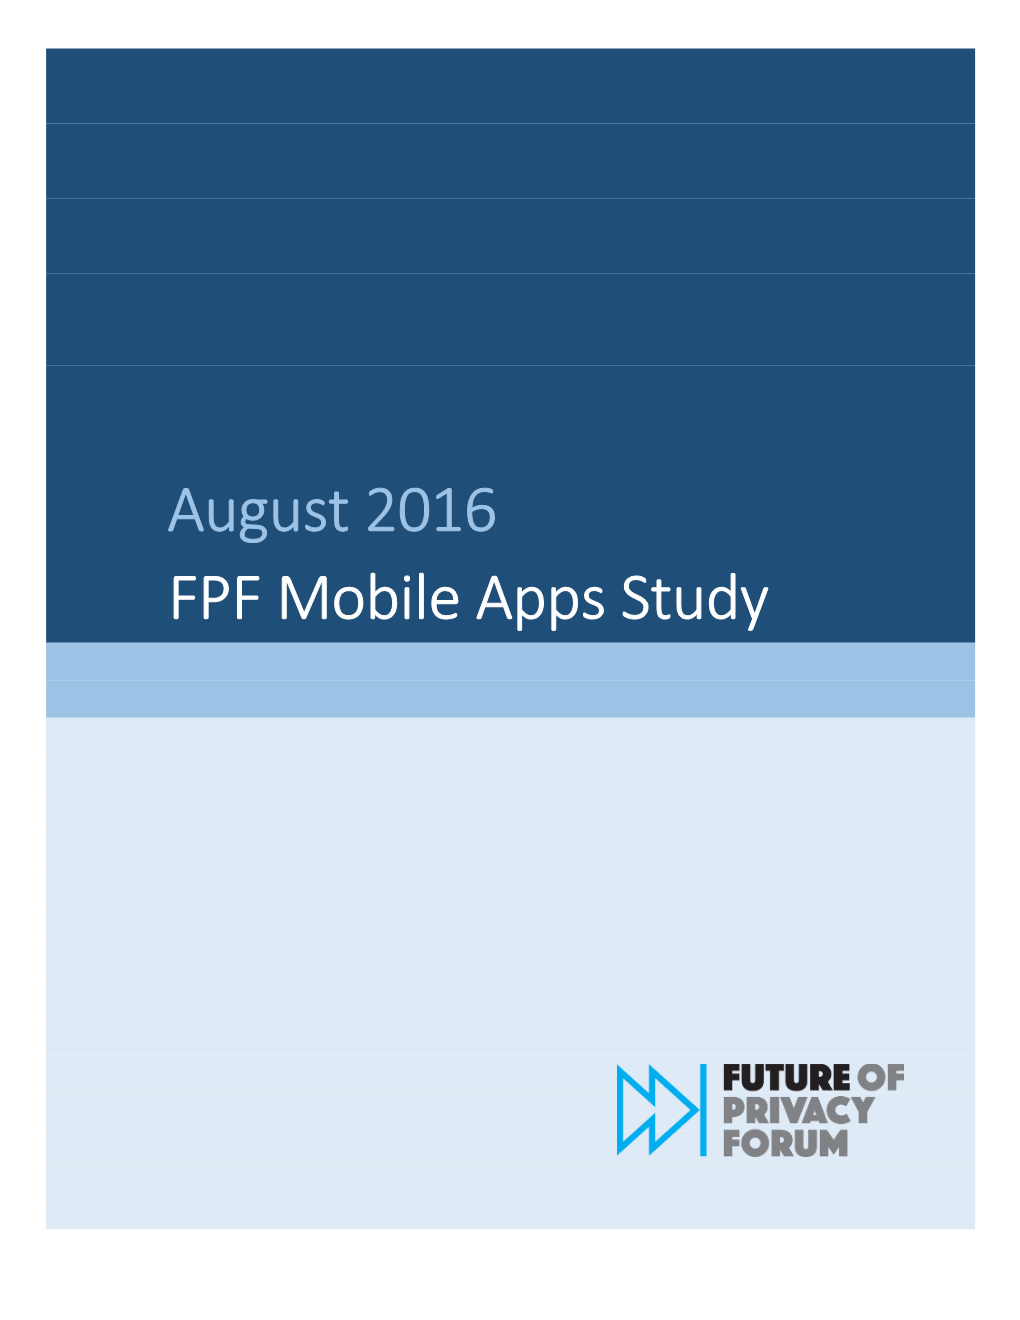 August 2016 FPF Mobile Apps Study